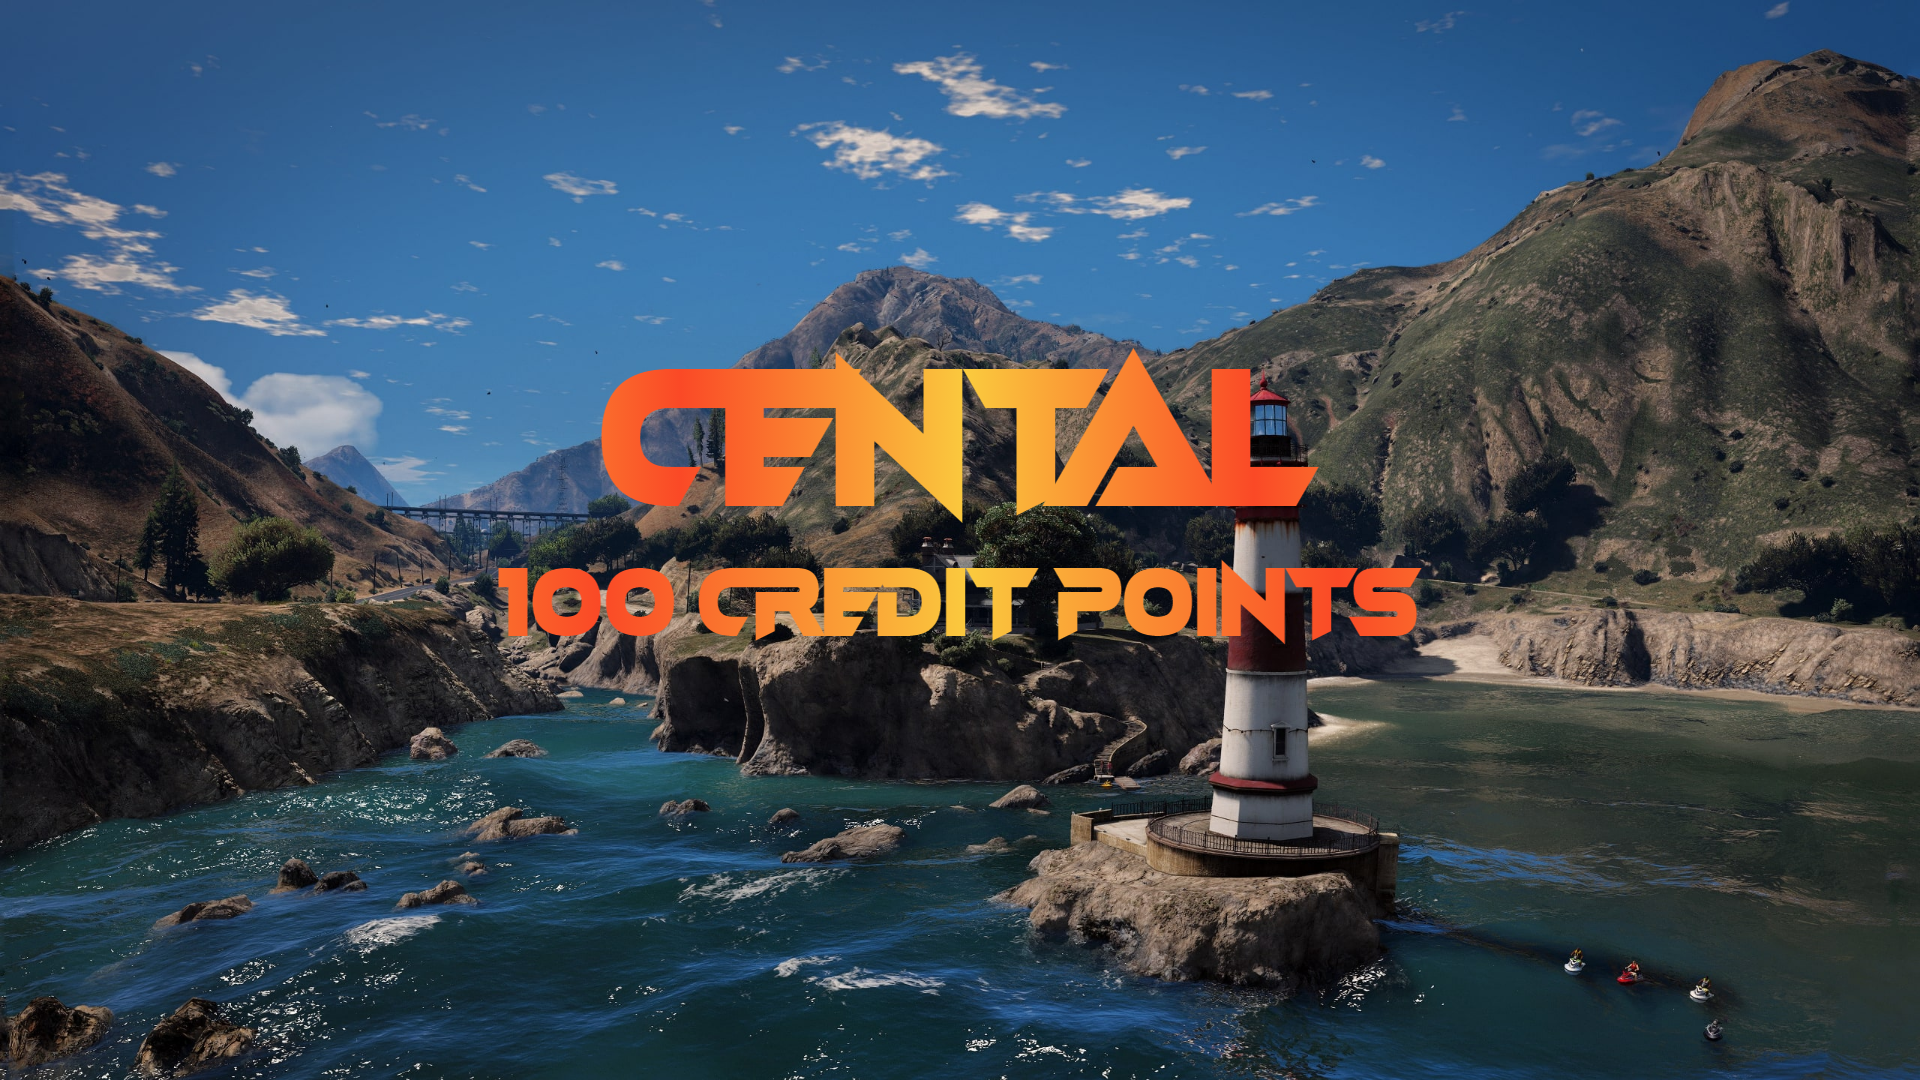 CentralRP - 100 Credit Points Gift Card 11.29 $